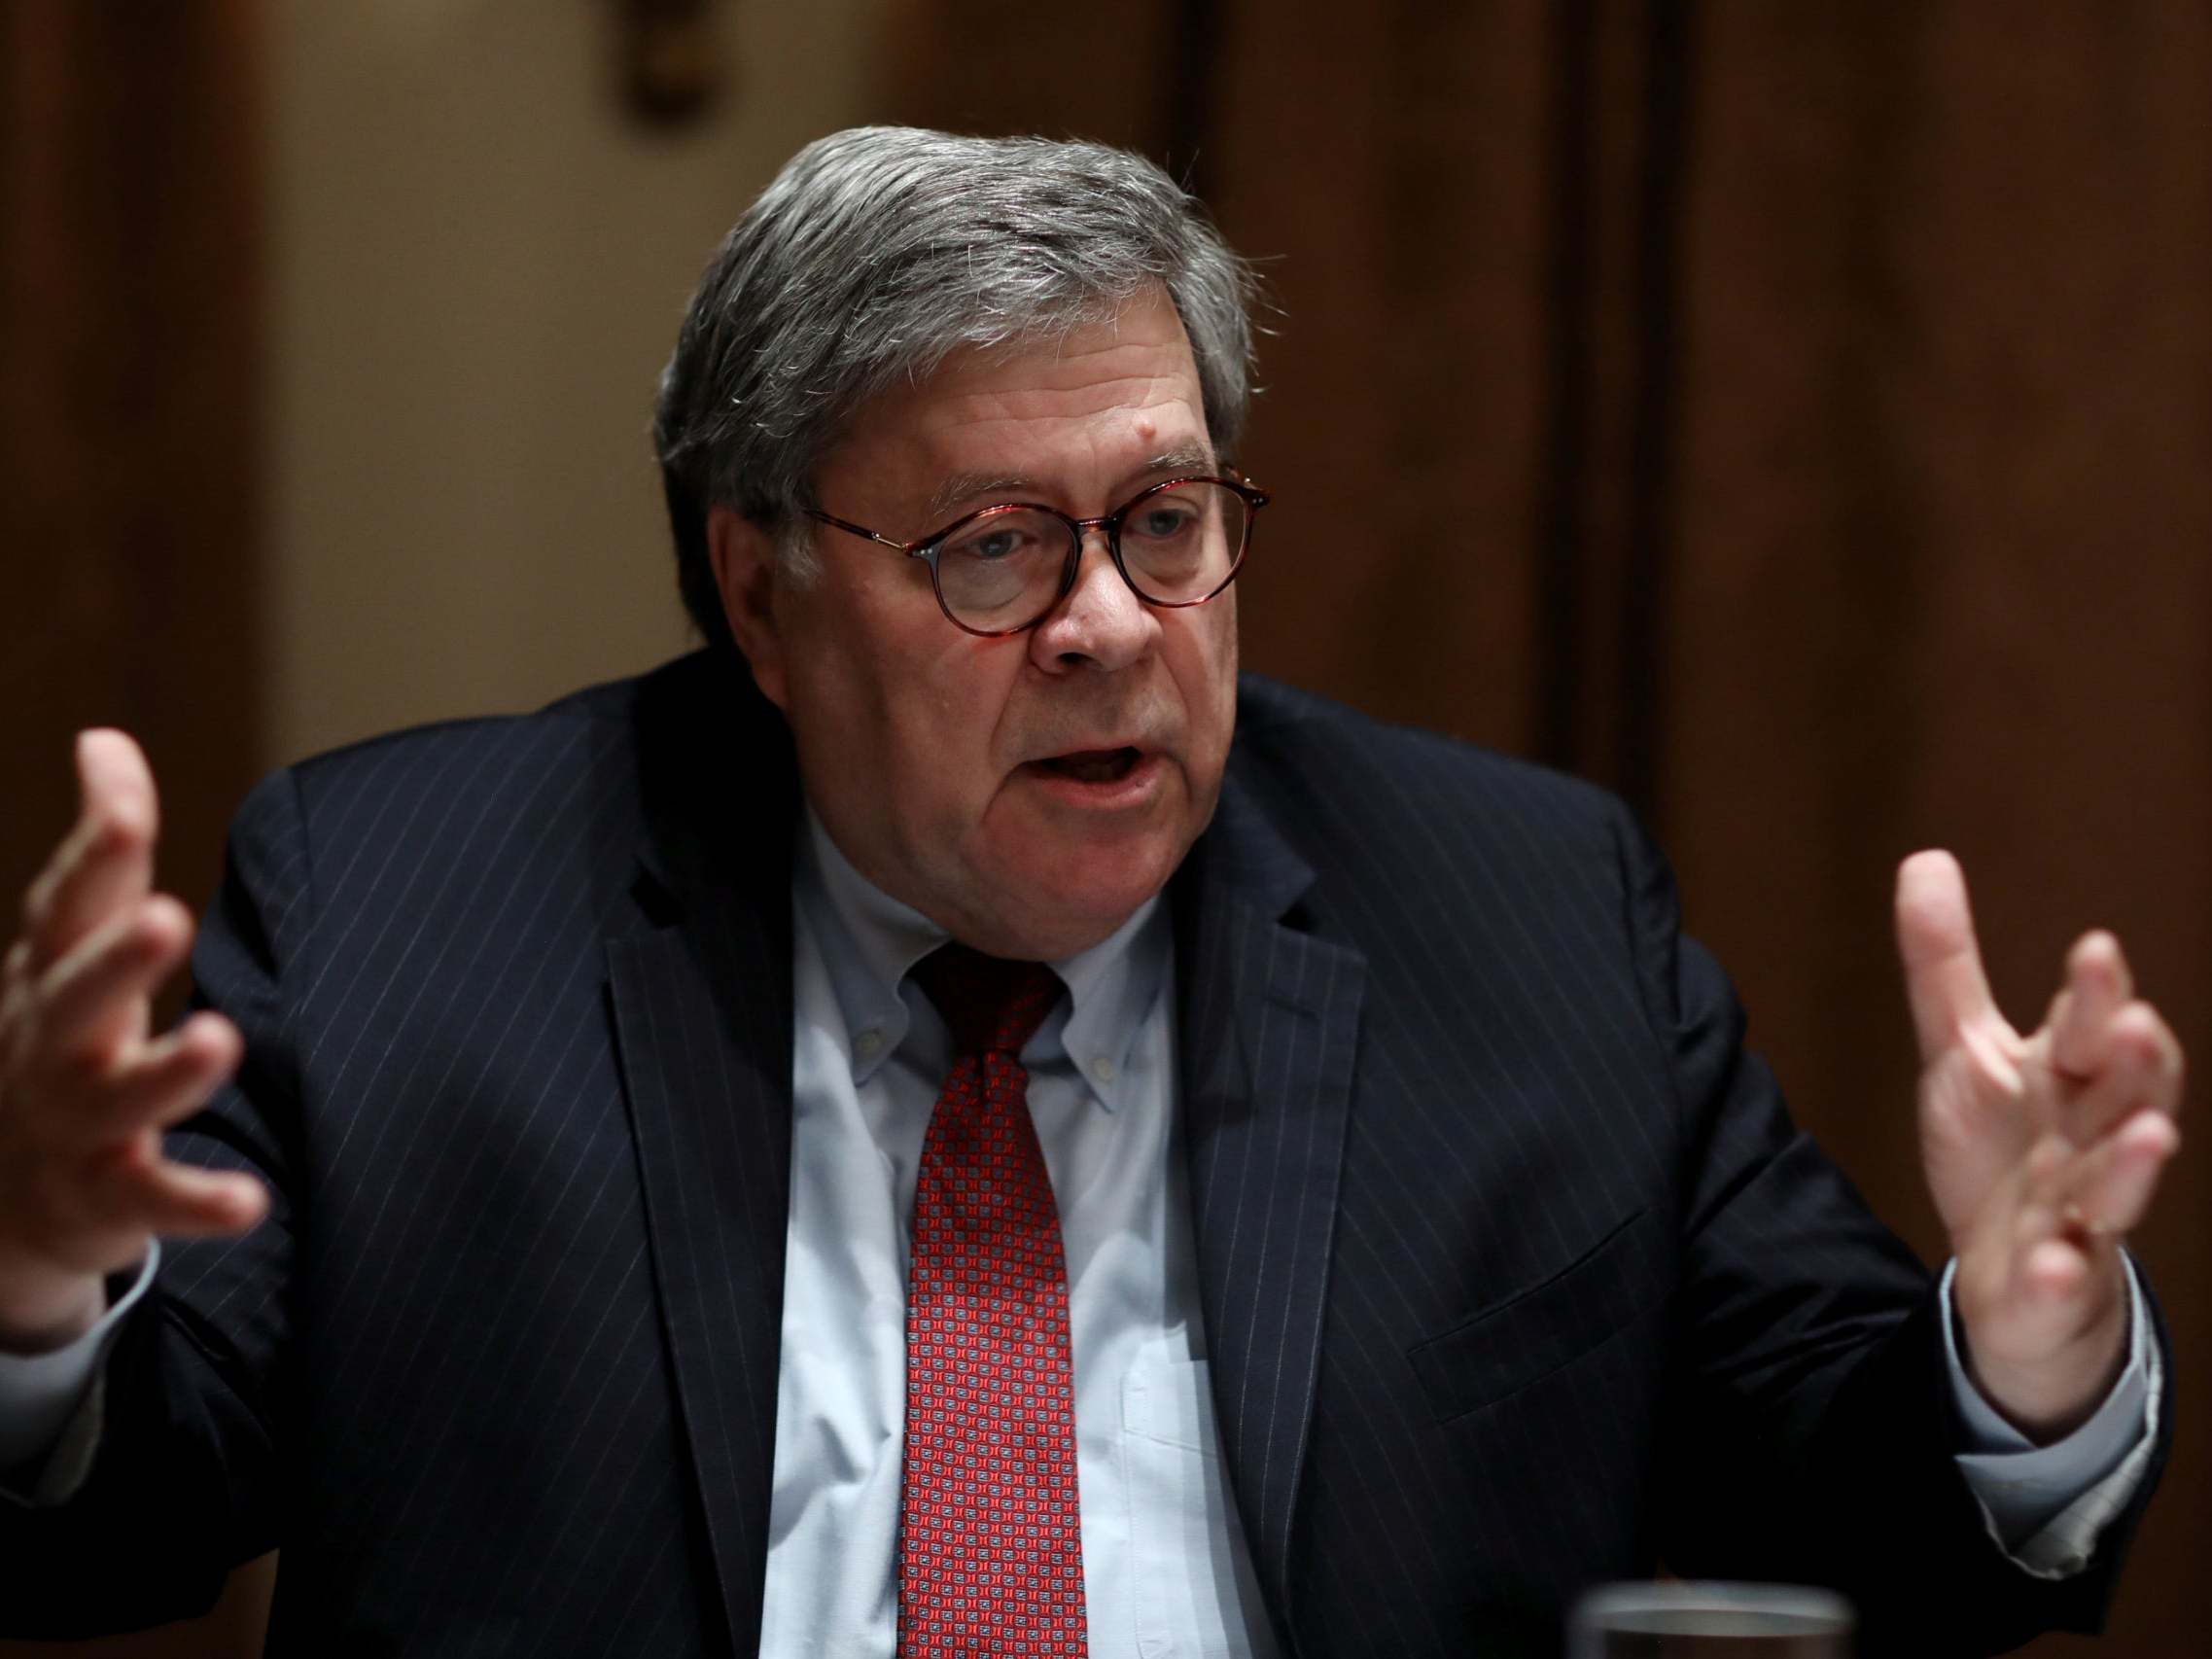 Attorney general William Barr has directed the prisons bureau to schedule the executions from mid-July